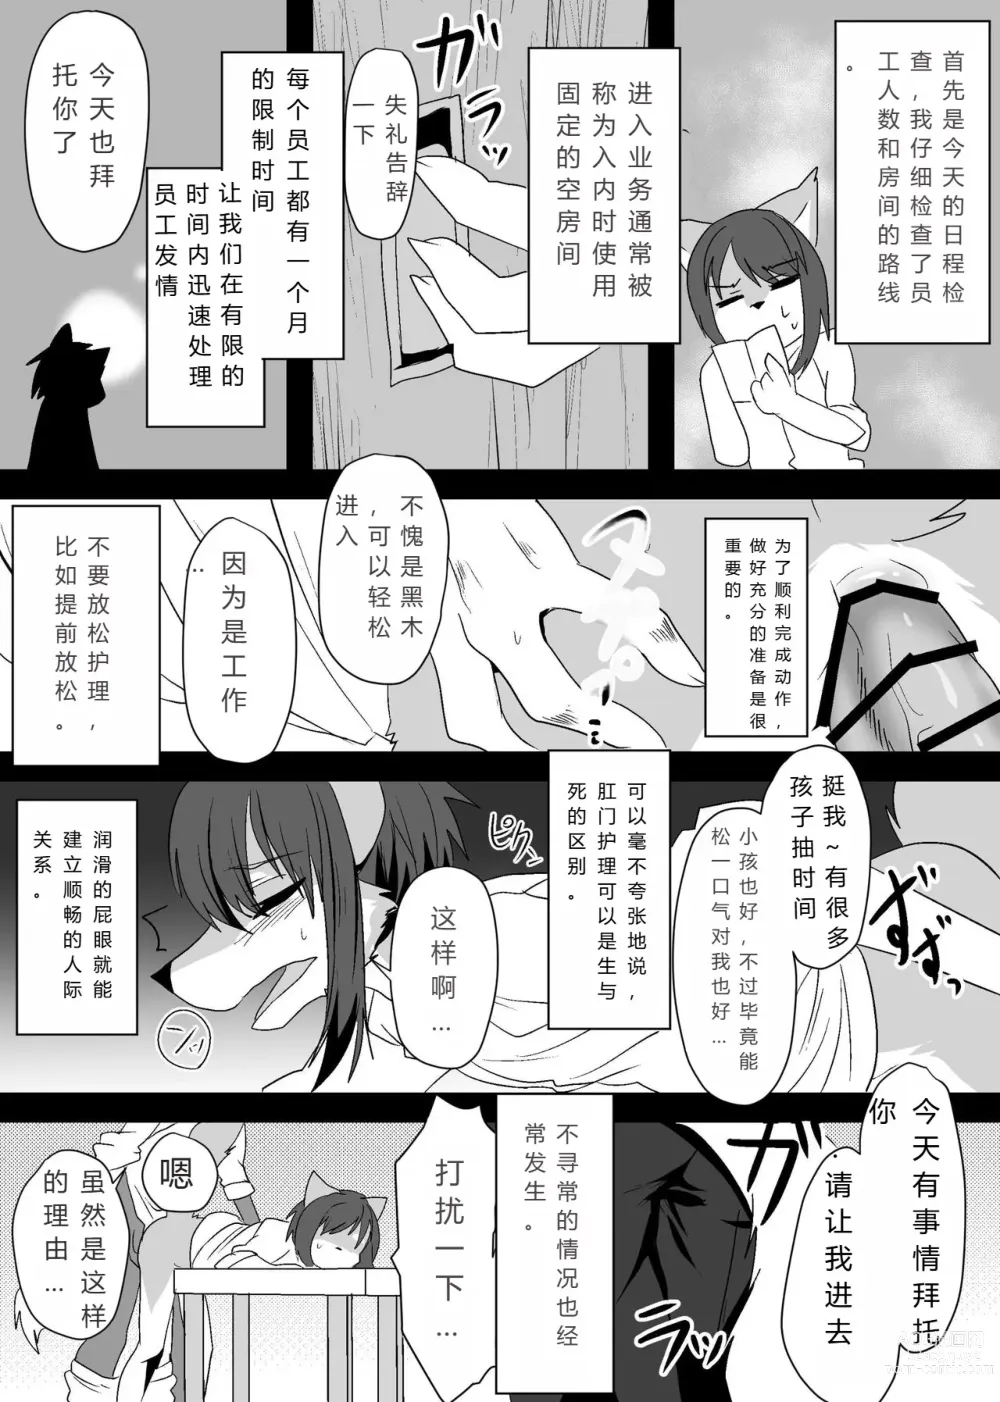 Page 4 of doujinshi 我们要上班吗？